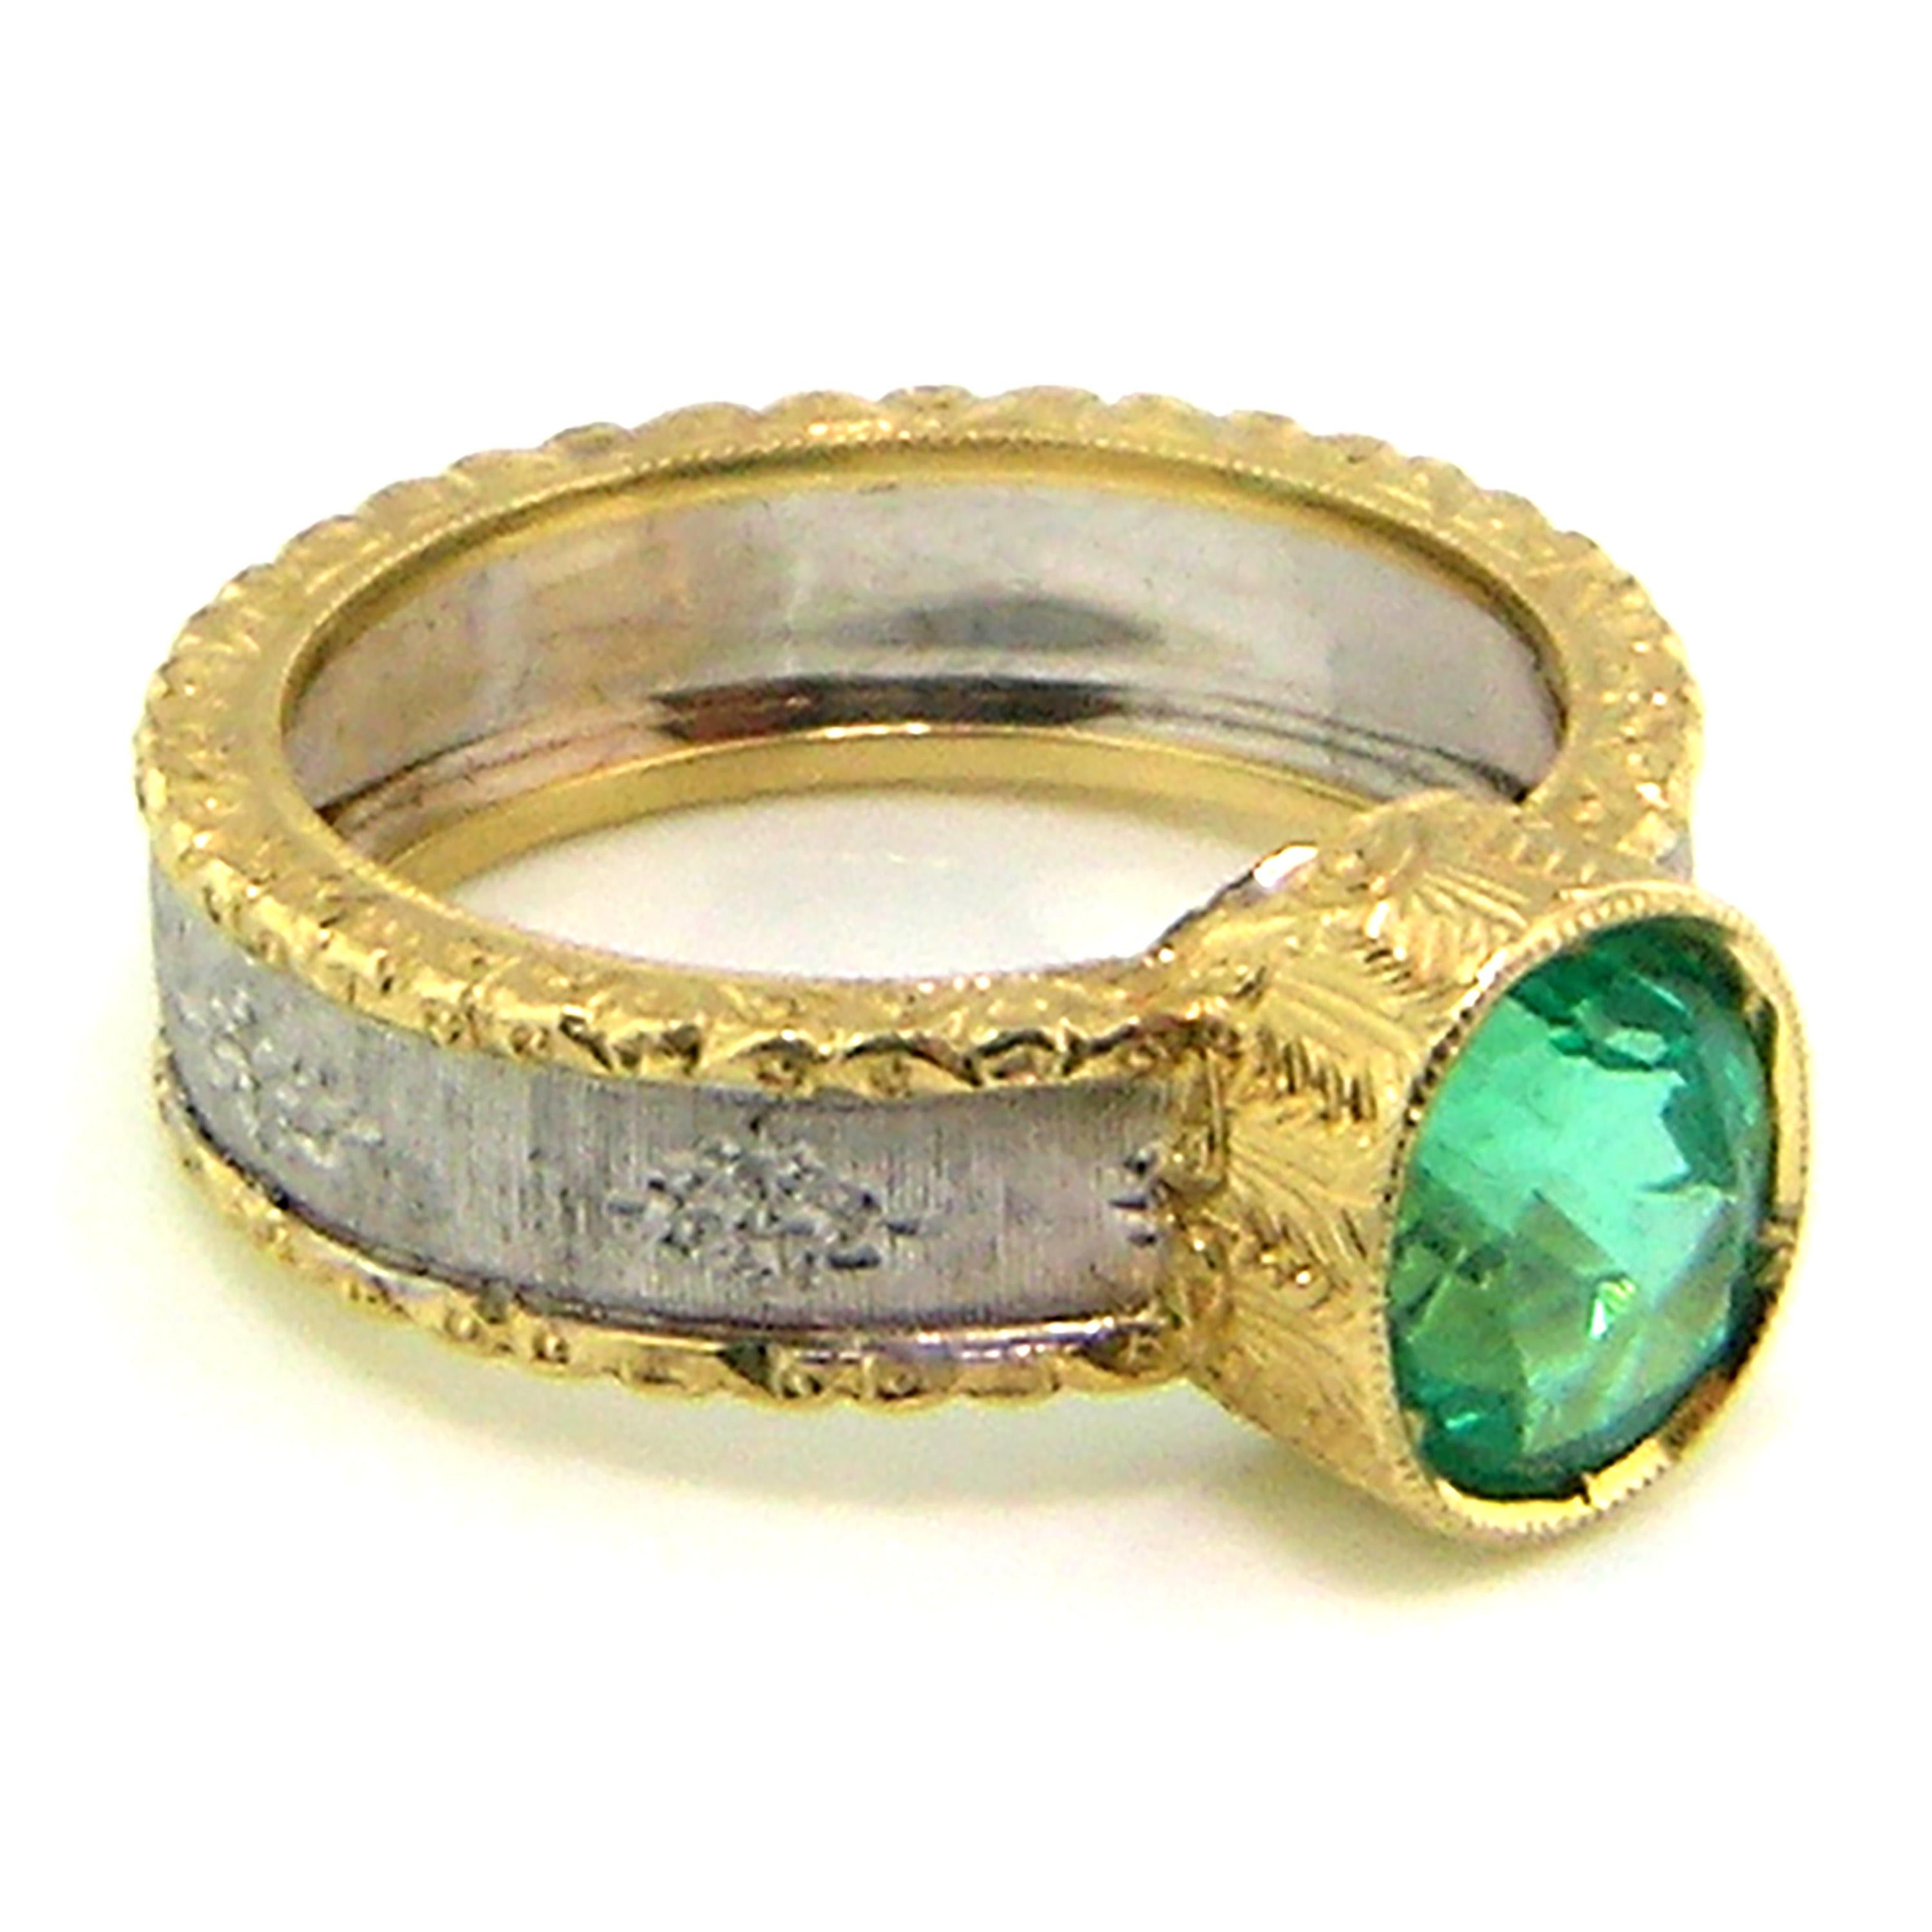 Oval Cut 1.68ct Colombian Emerald in an 18kt Gold Ring, Handmade and Engraved in Italy